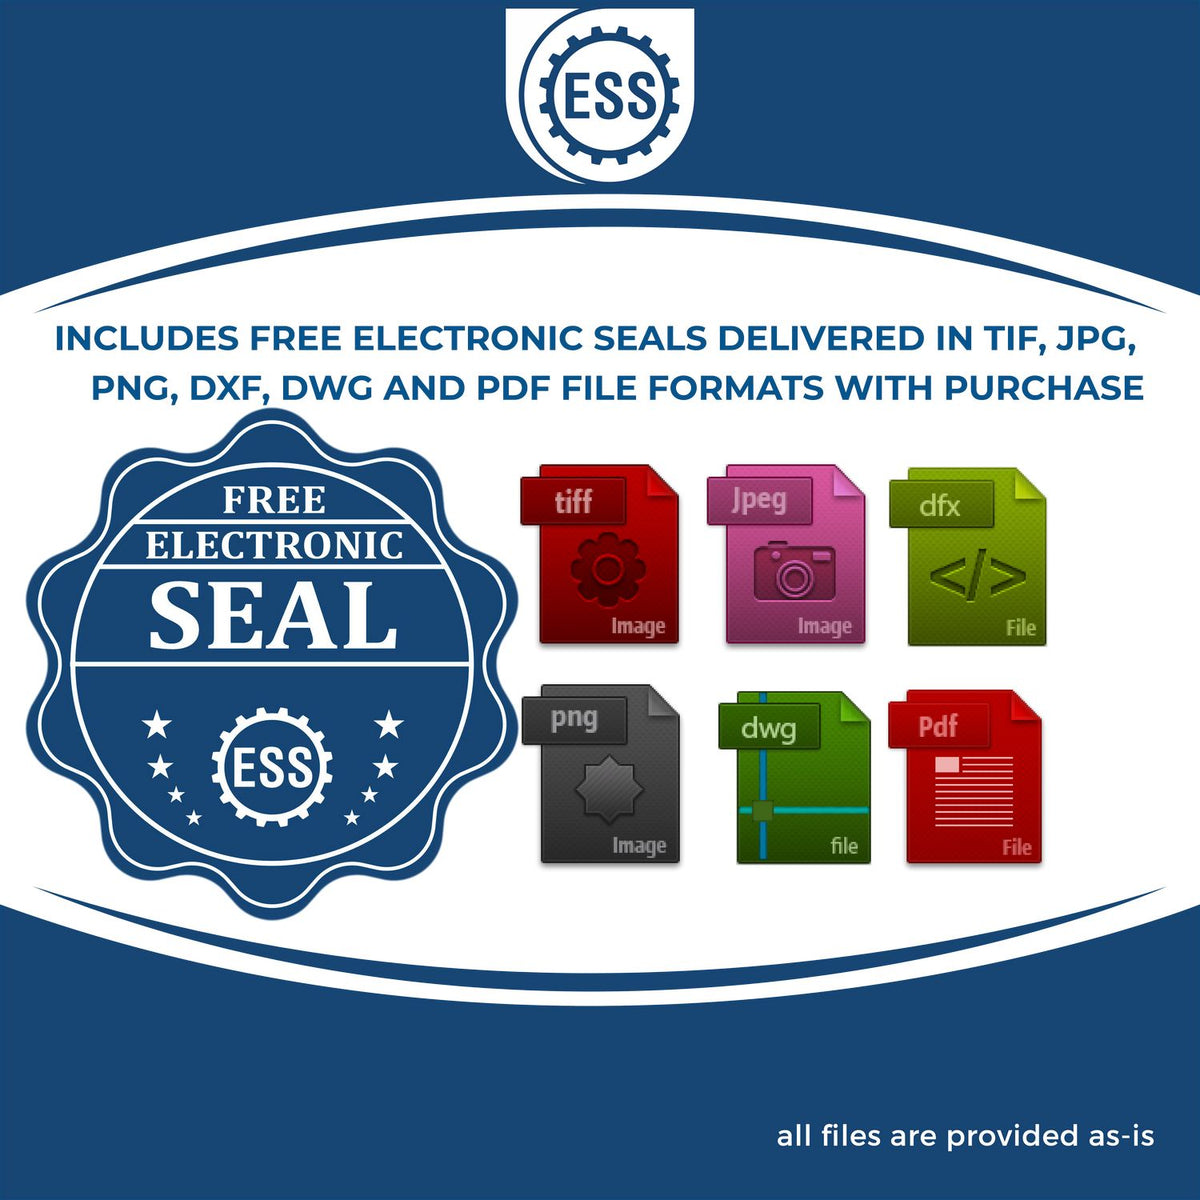 An infographic for the free electronic seal for the Gift New York Landscape Architect Seal illustrating the different file type icons such as DXF, DWG, TIF, JPG and PNG.